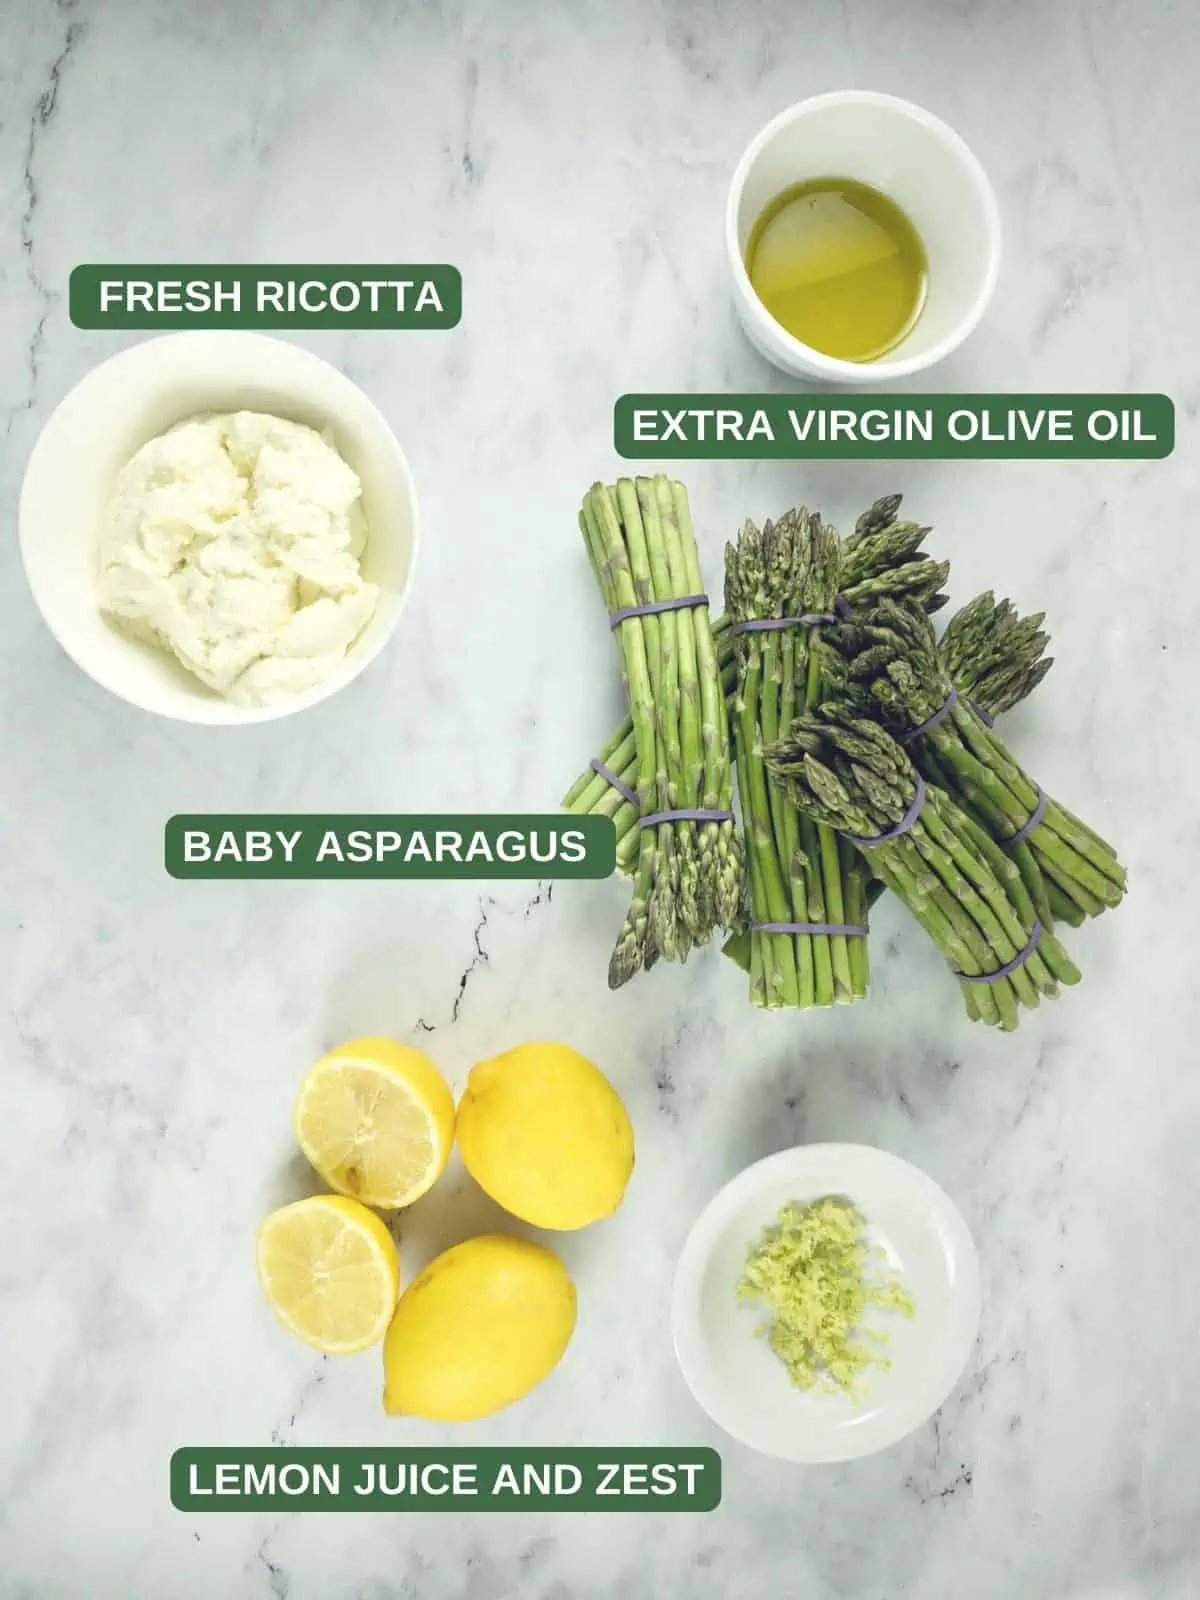 Labelled ingredients needed to make baby asparagus salad.